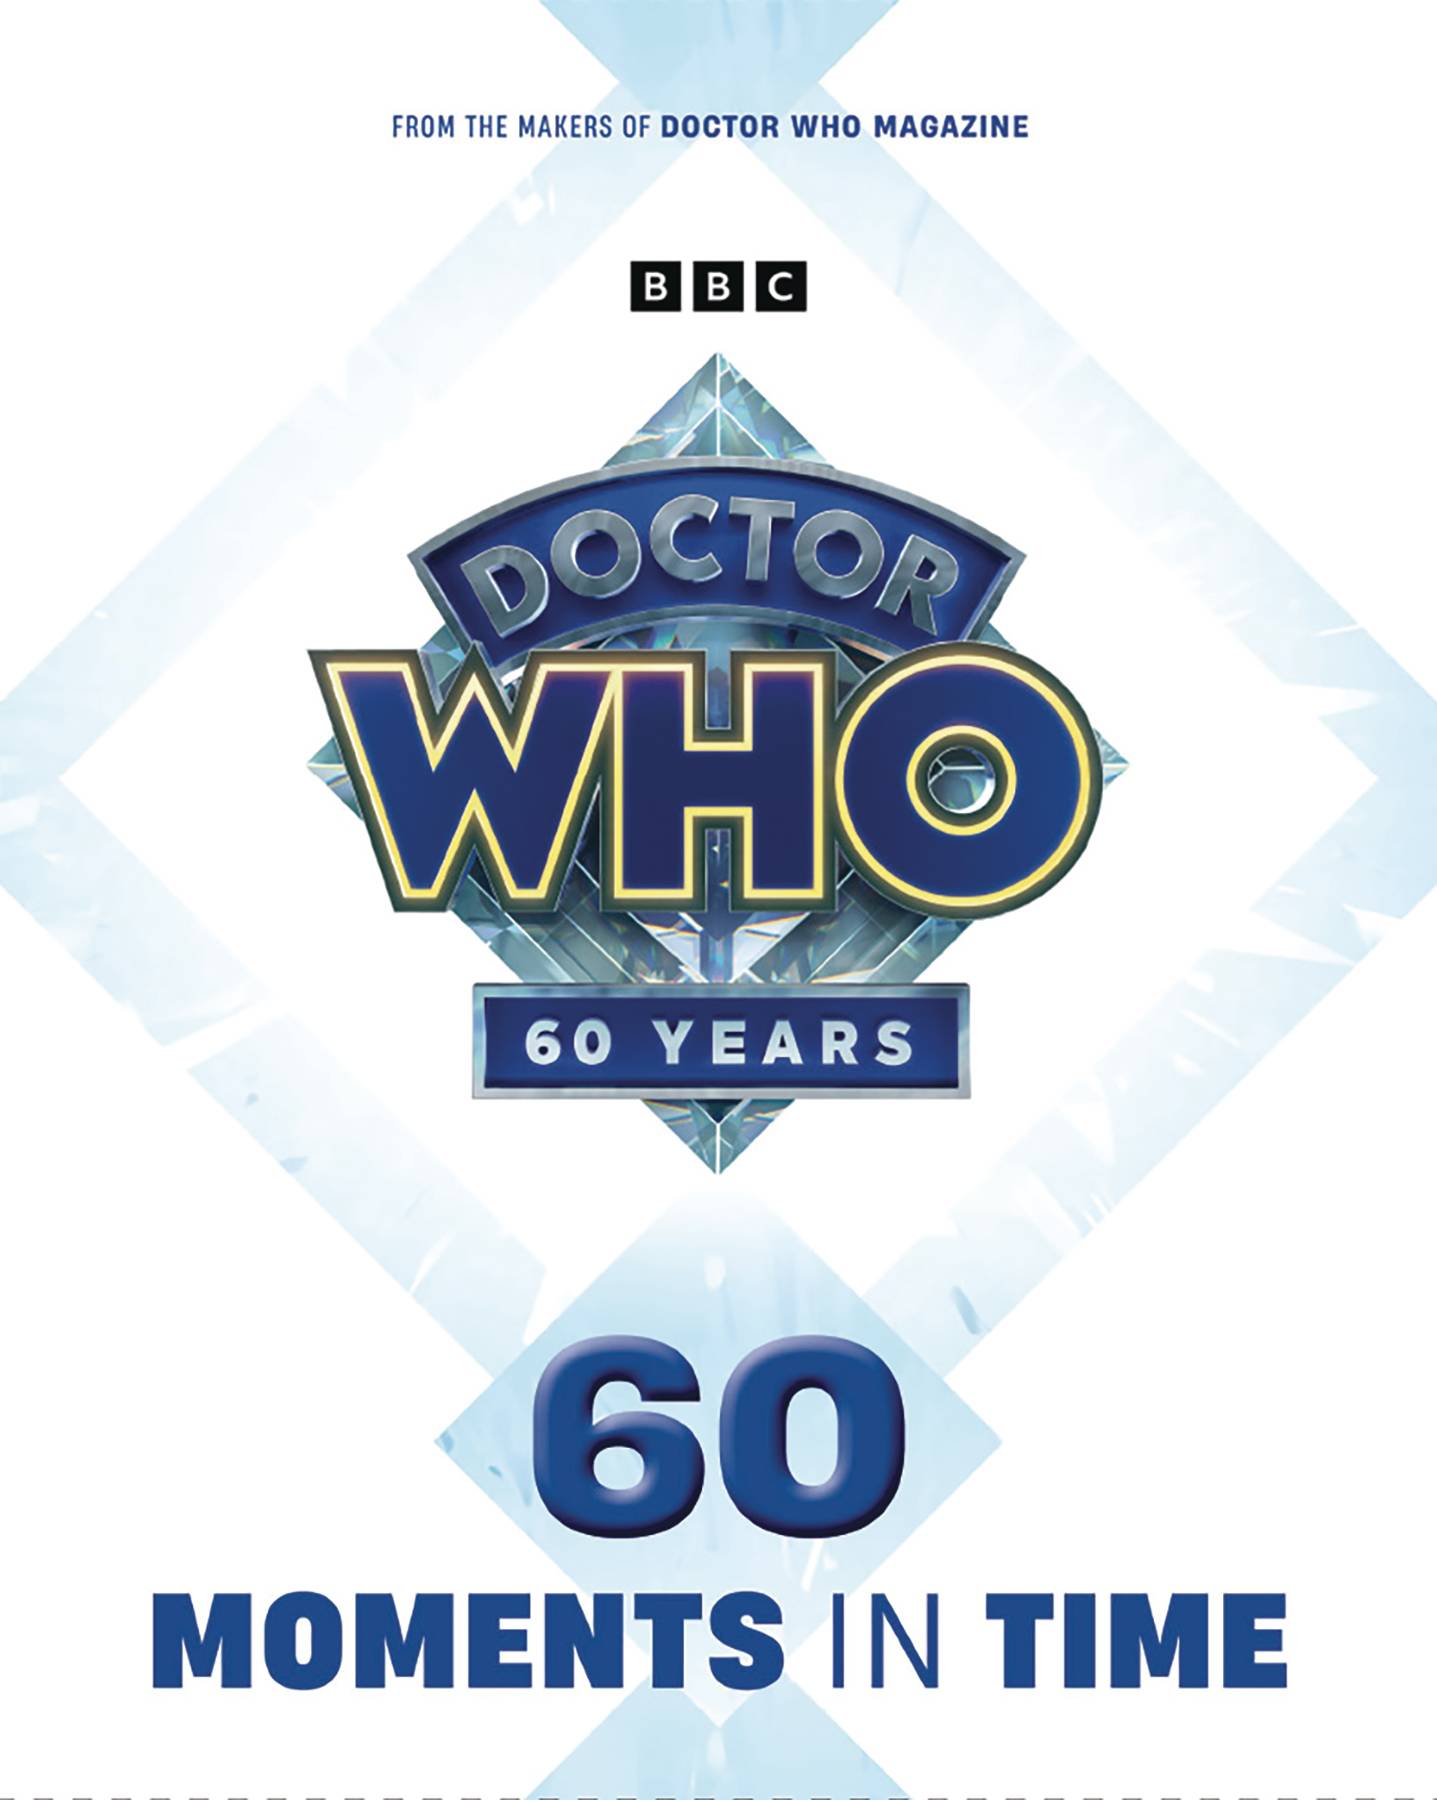 DOCTOR WHO 60 MOMENTS IN TIME